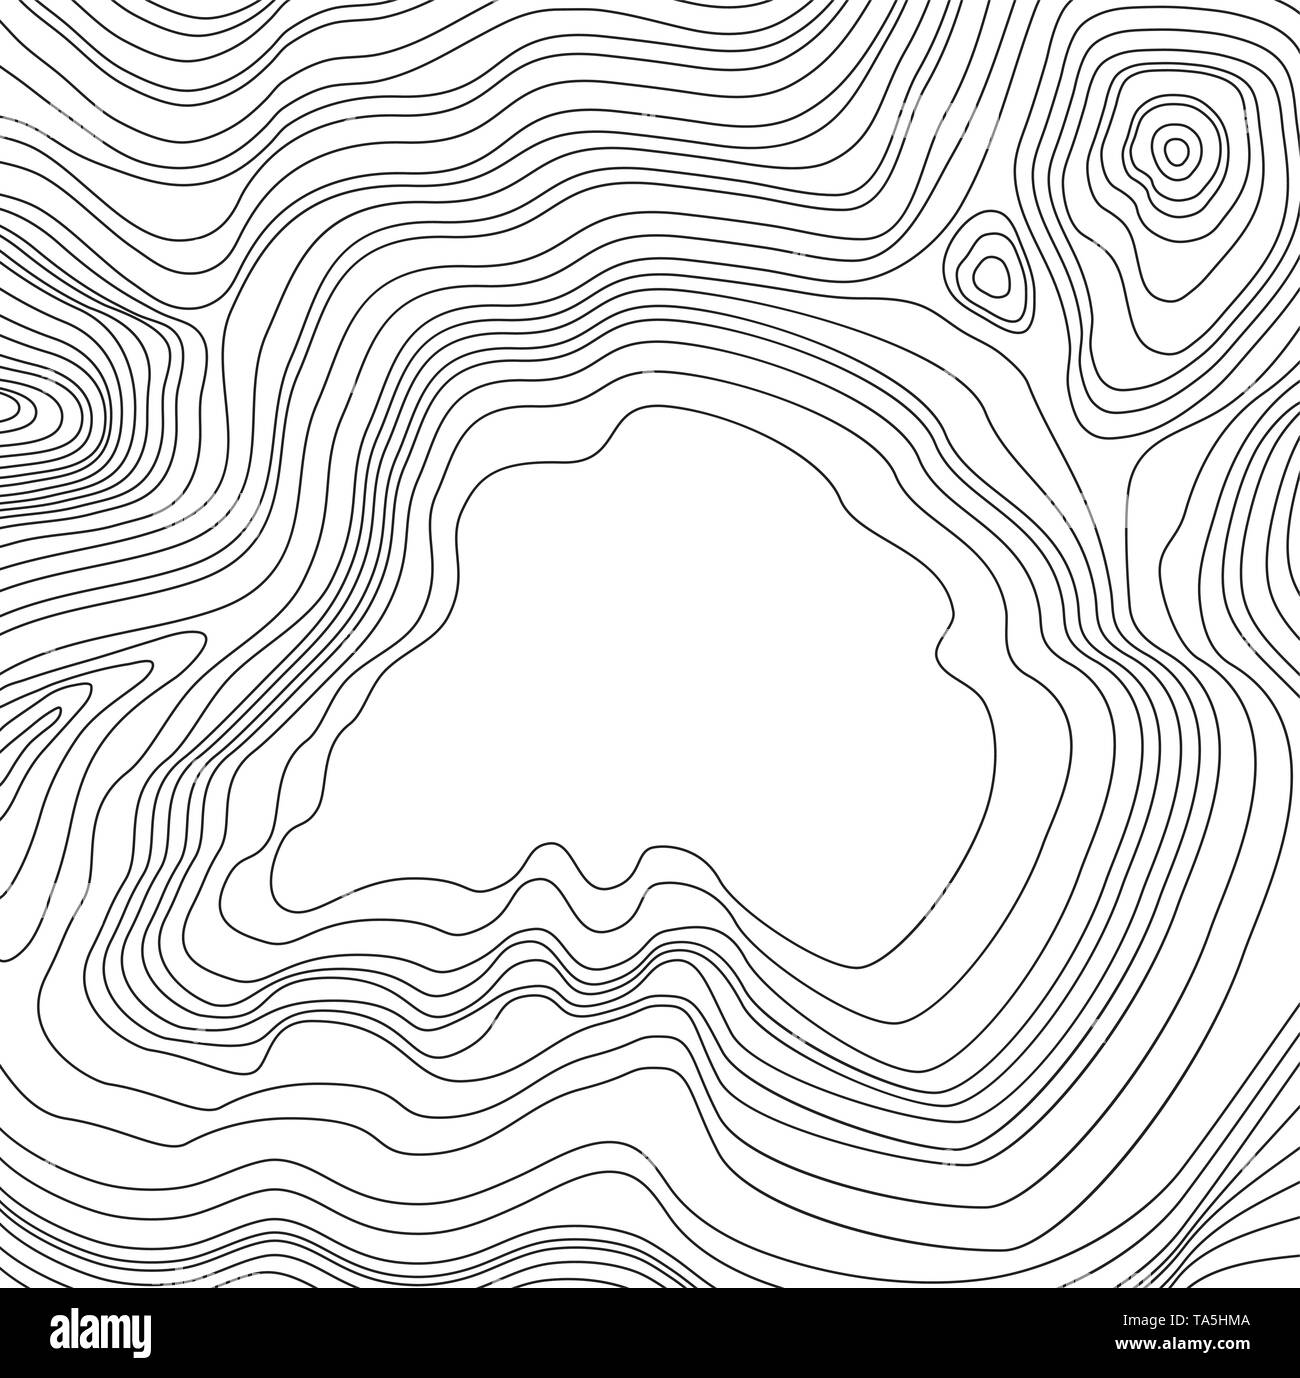 vector abstract map pattern with wavy lines and copy space for text. black and white topographic line contours. simple map design Stock Vector